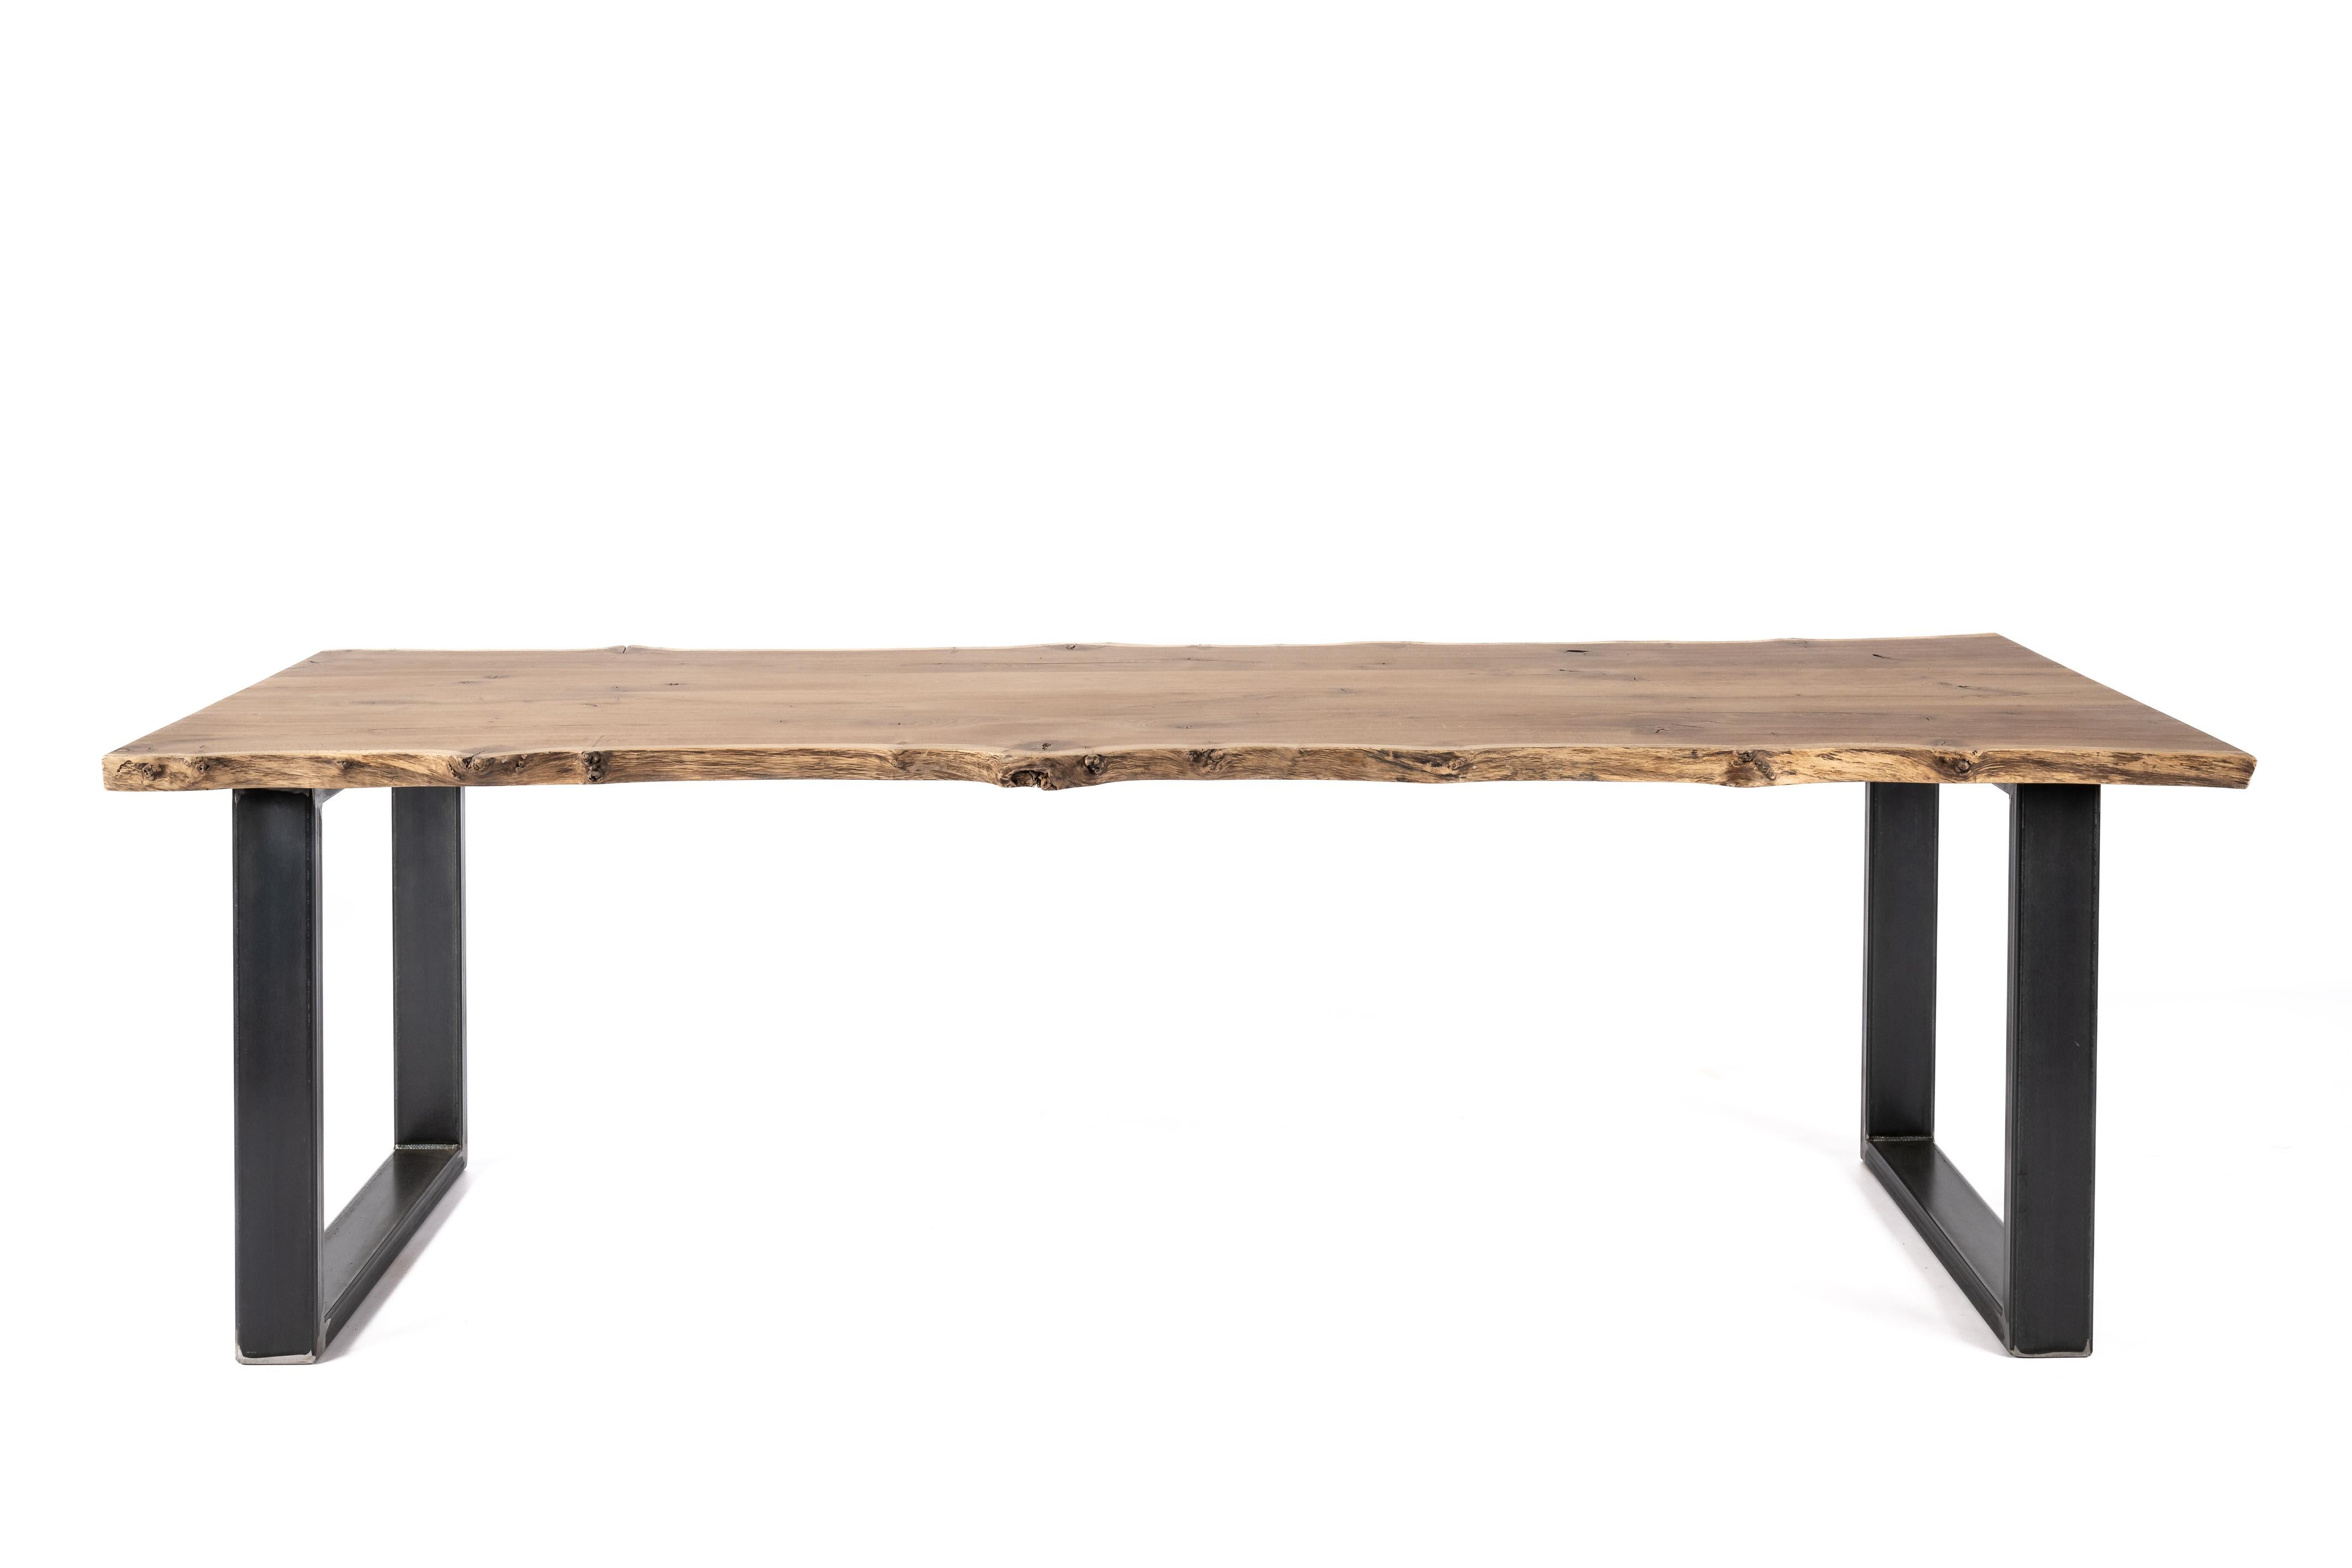 On offer here is a unique live edge solid aged oak dining table with a matte natural finish. Handcrafted from premium aged oak sourced from the lush forests of Northeastern France, this table boasts a unique charm that sets it apart. This unique